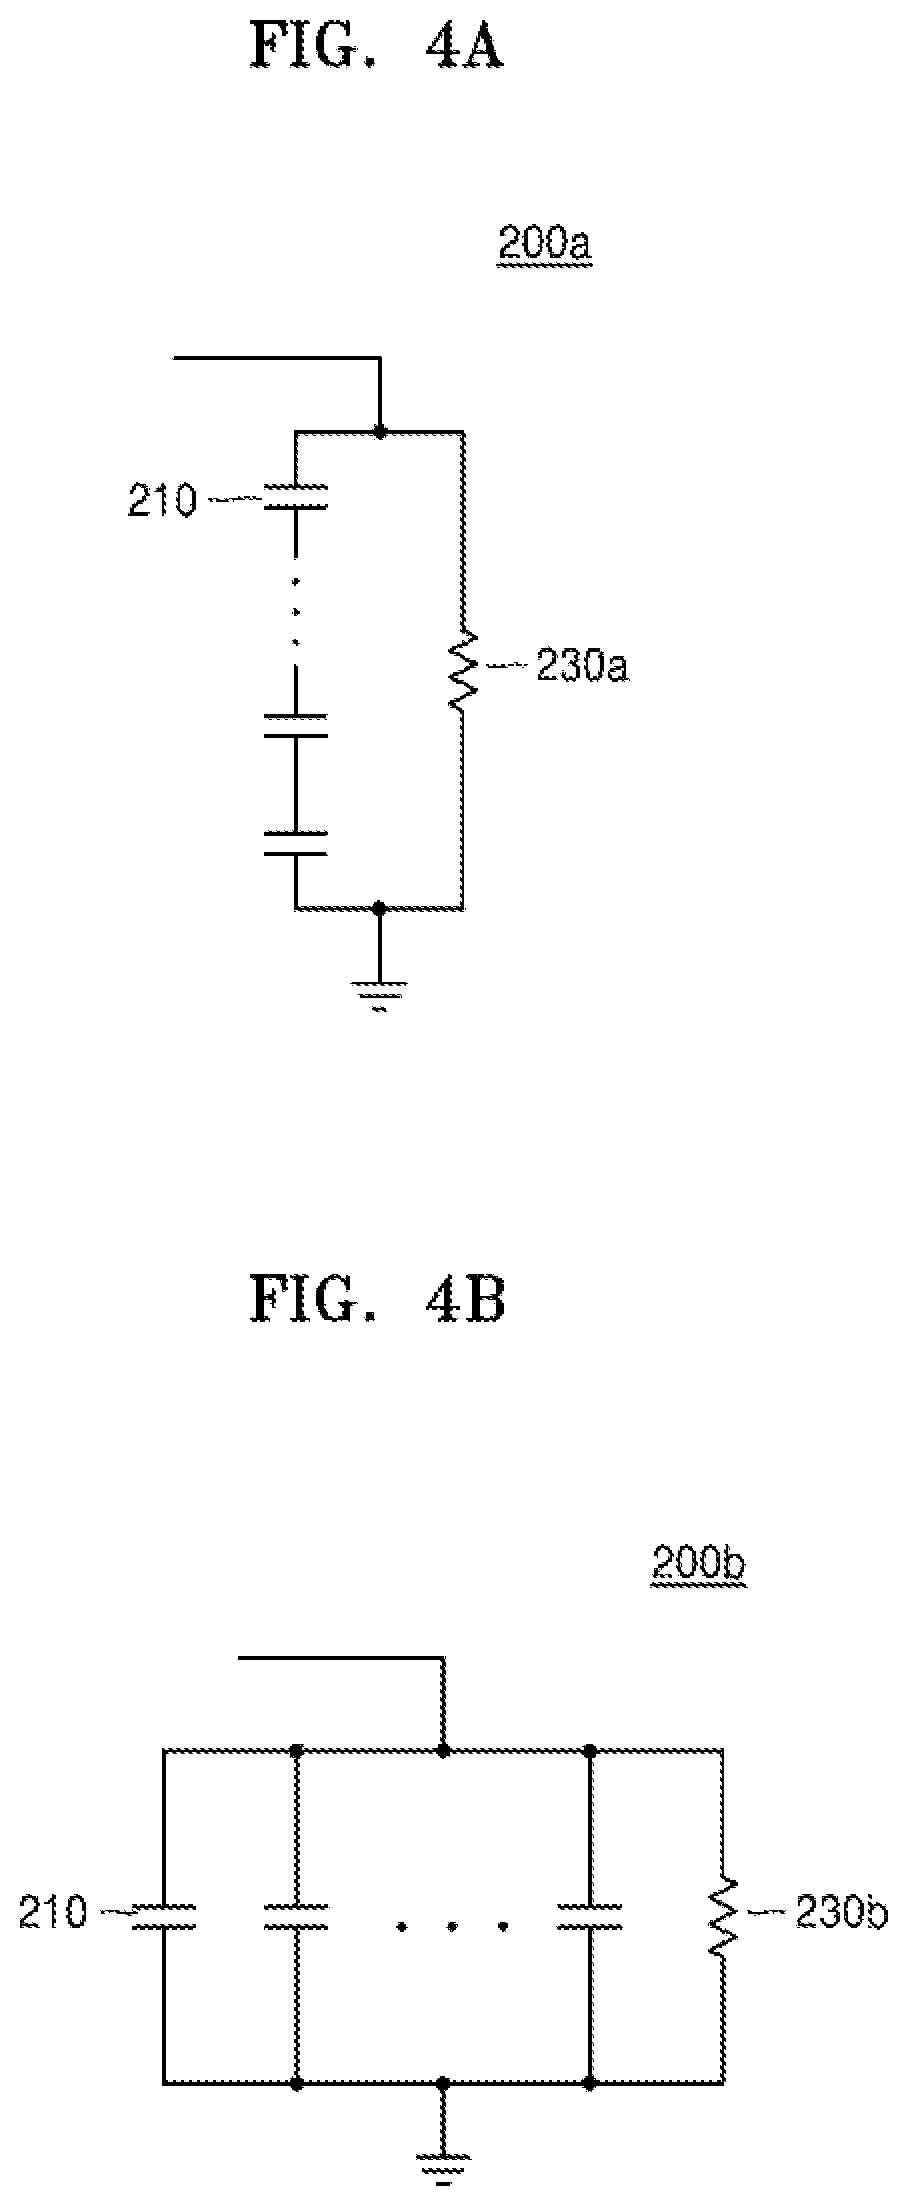 Memory system storage device with path circuit